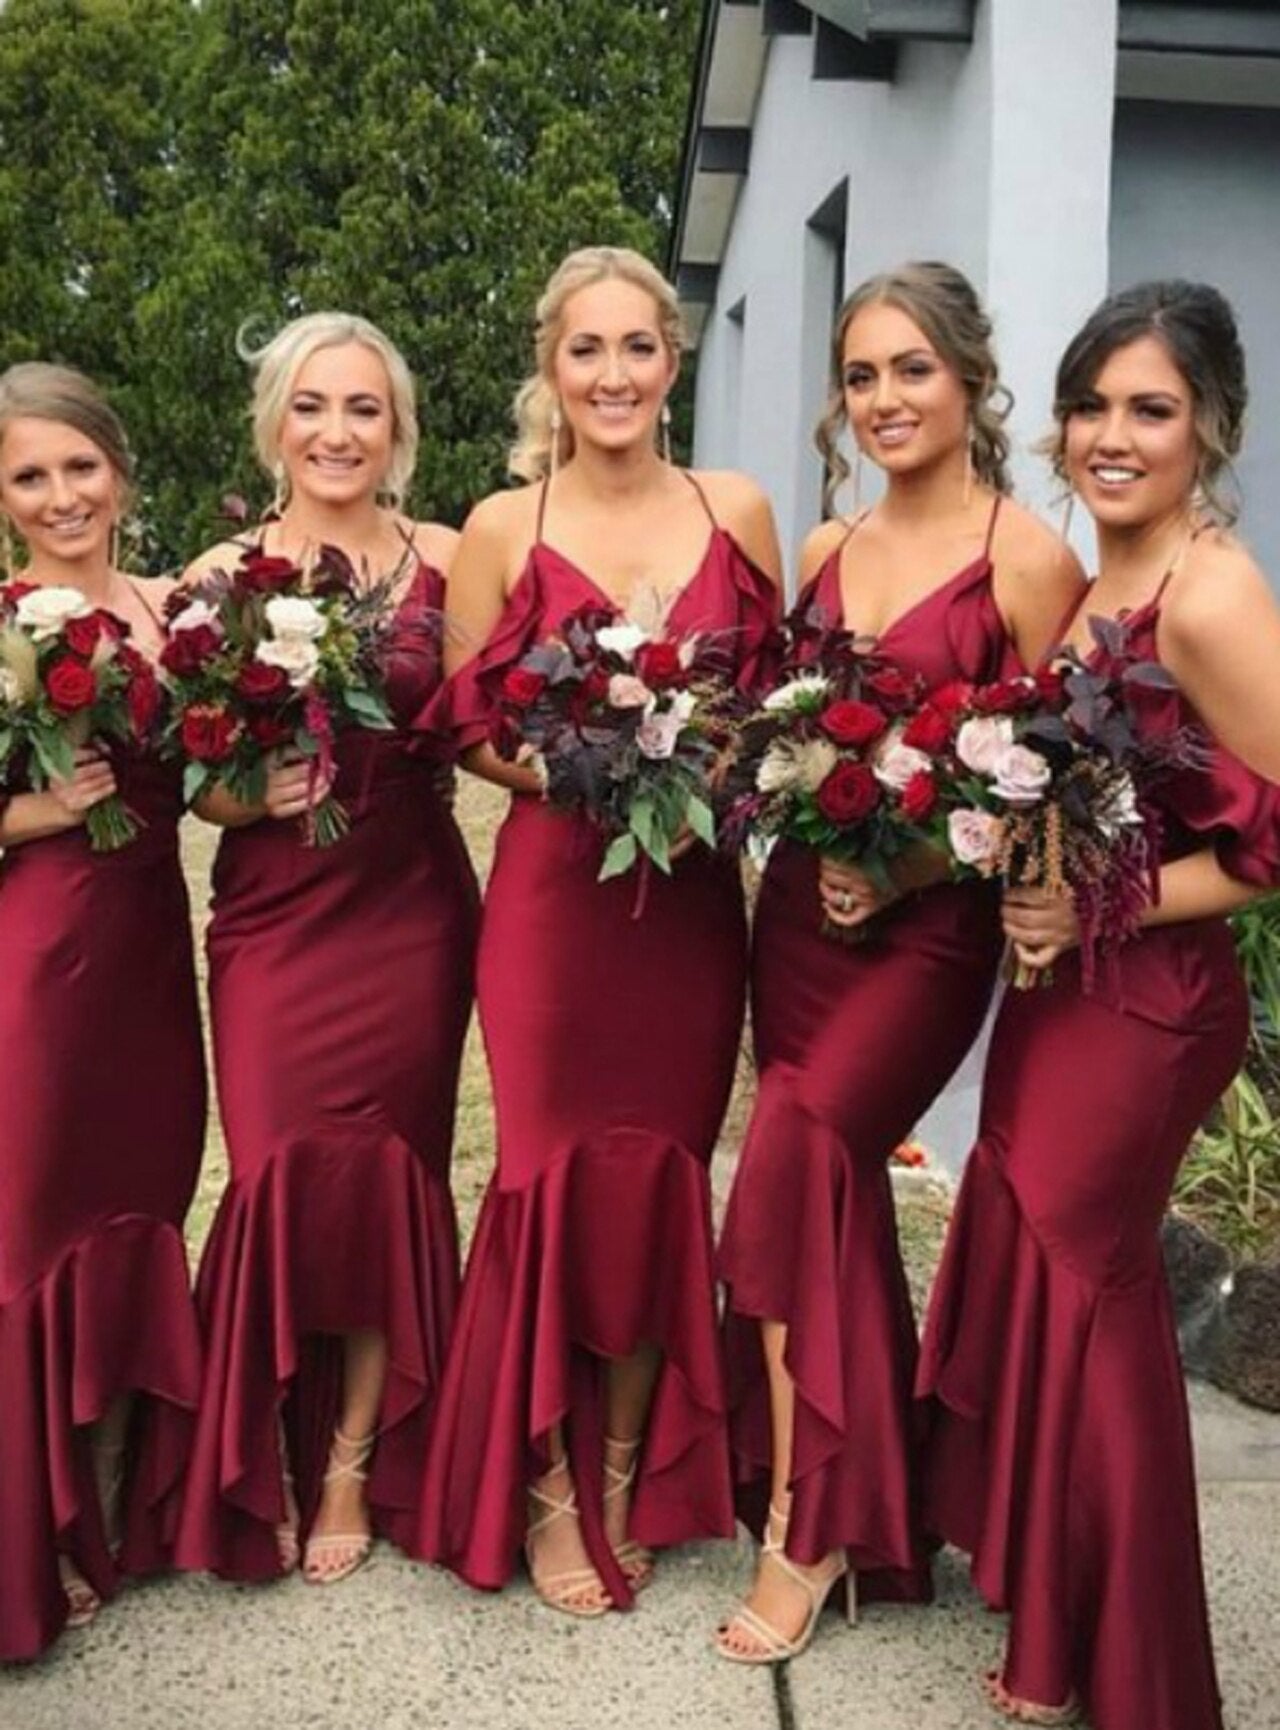 Beautiful Bridesmaid Dresses To Consider For Your Wedding – MyChicDress